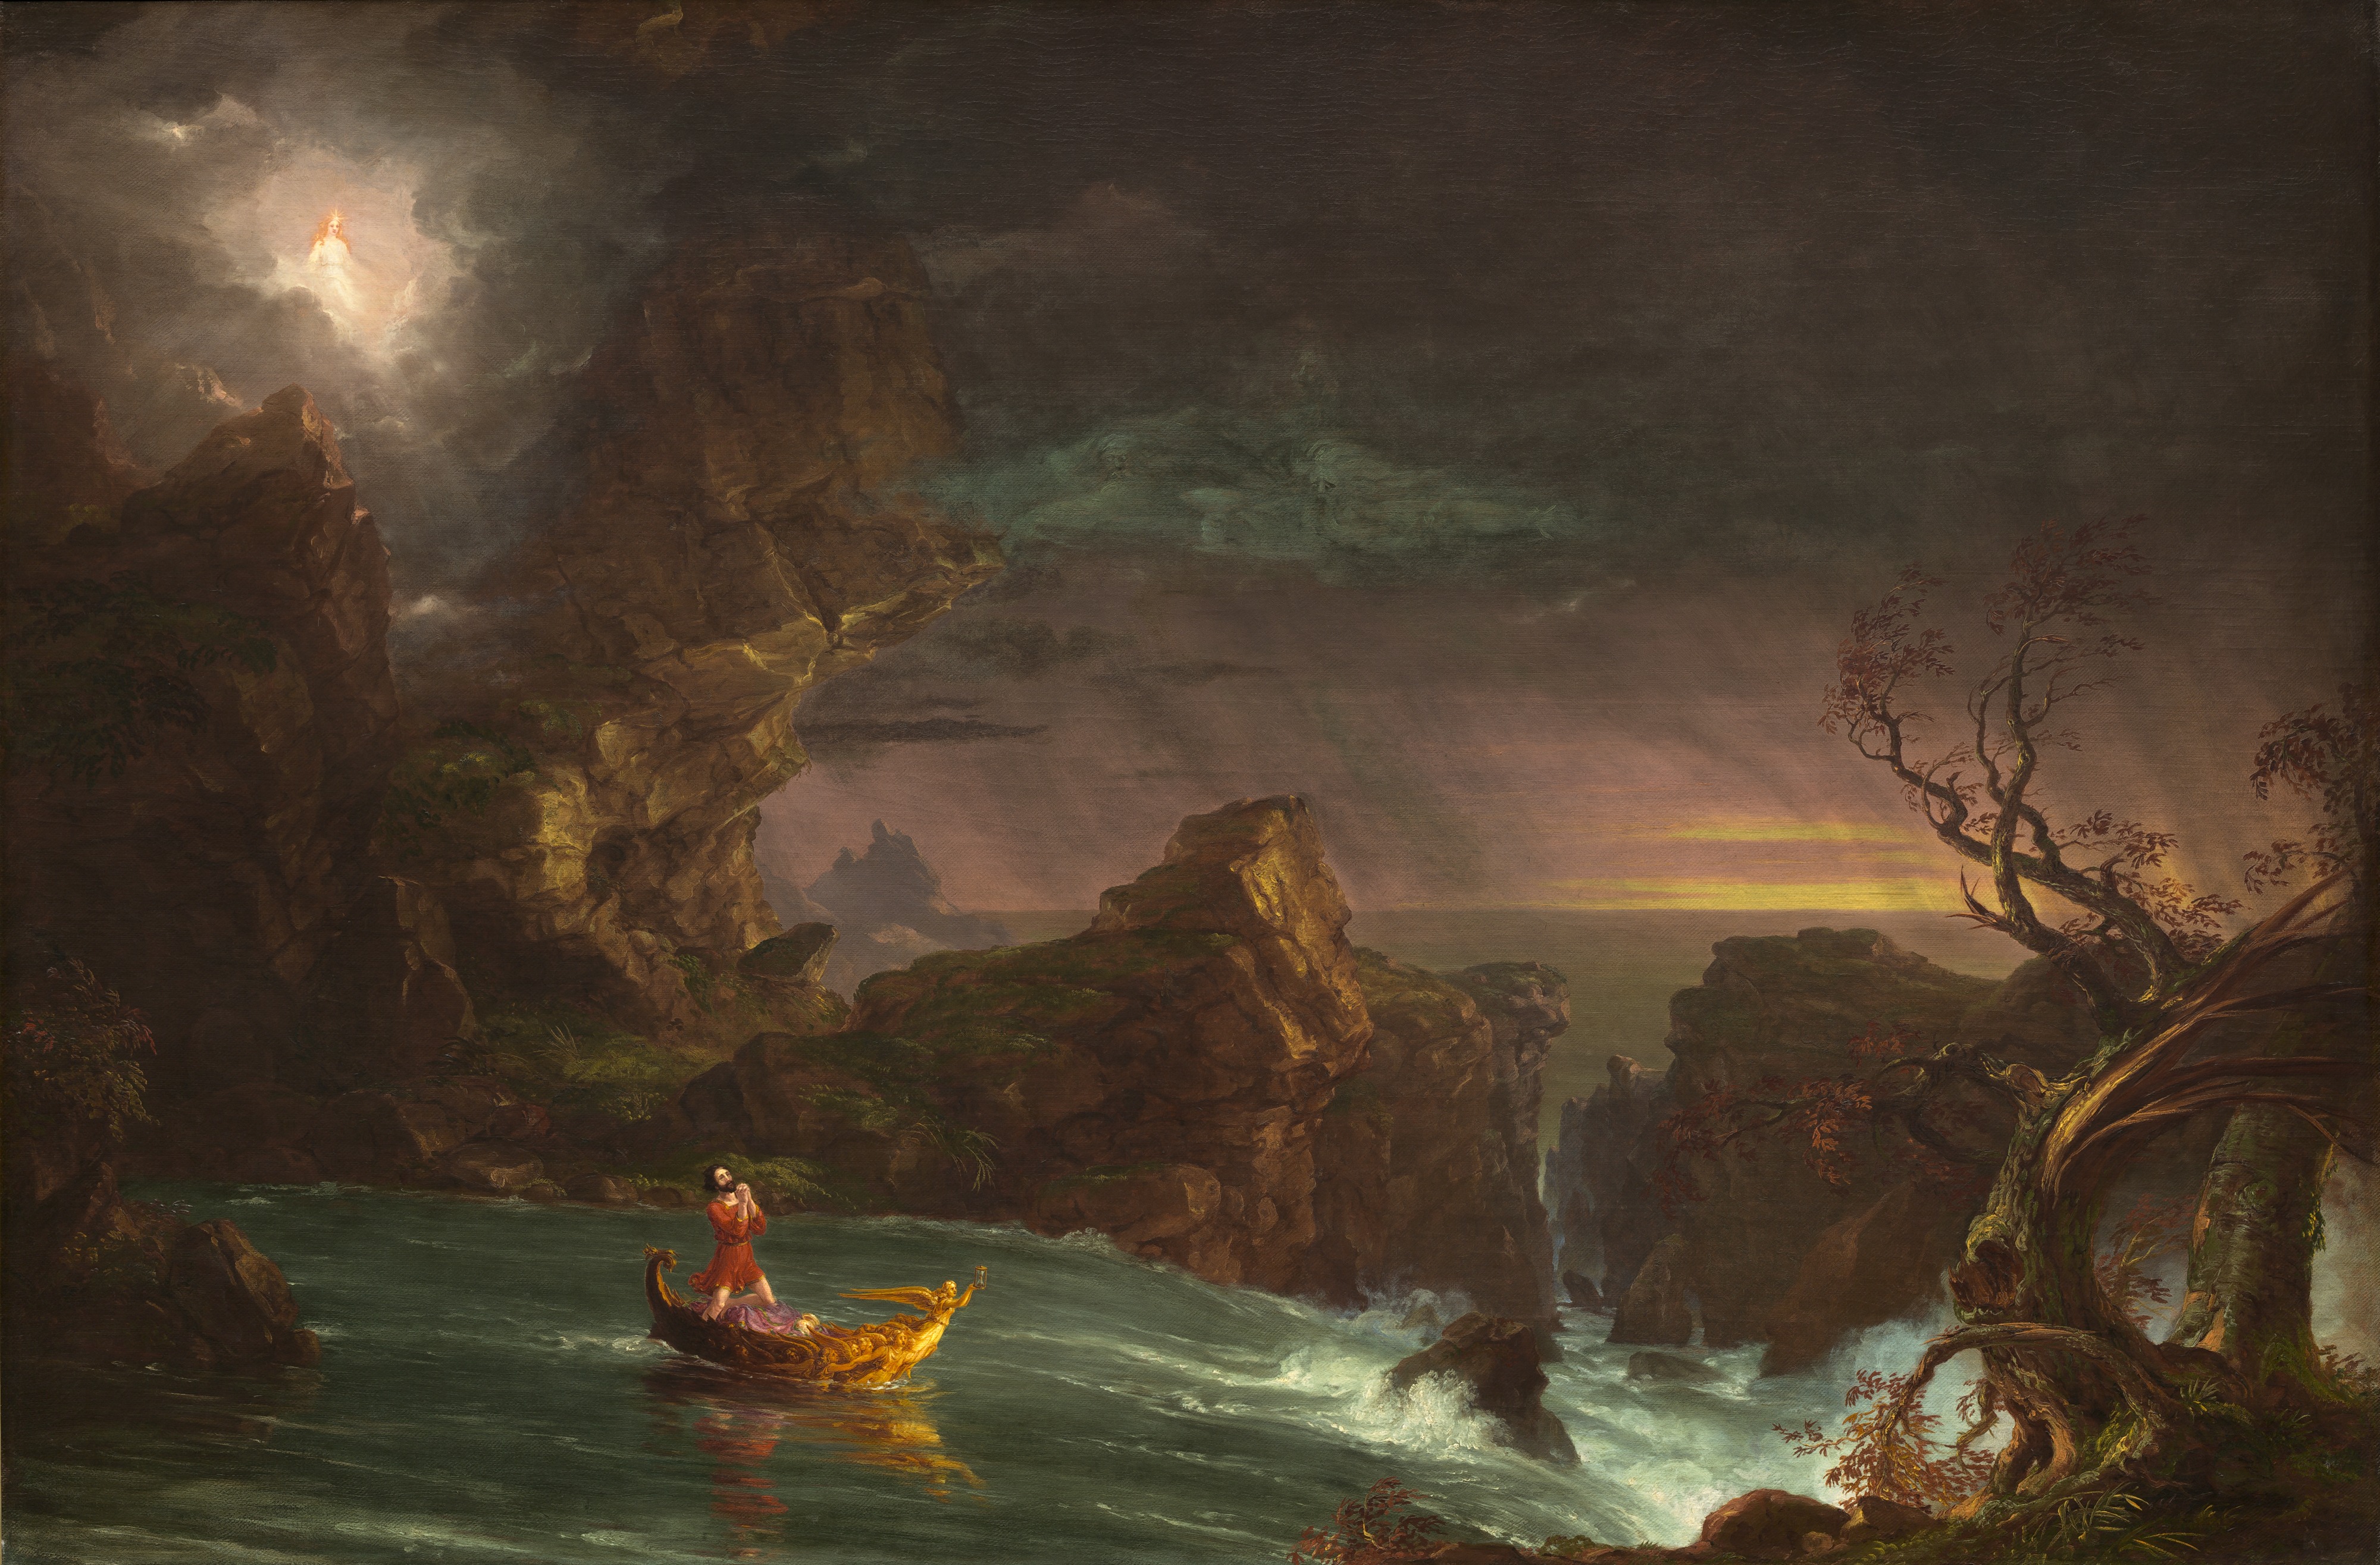 Thomas Cole, The Voyage of Life, 1842, National Gallery of Art